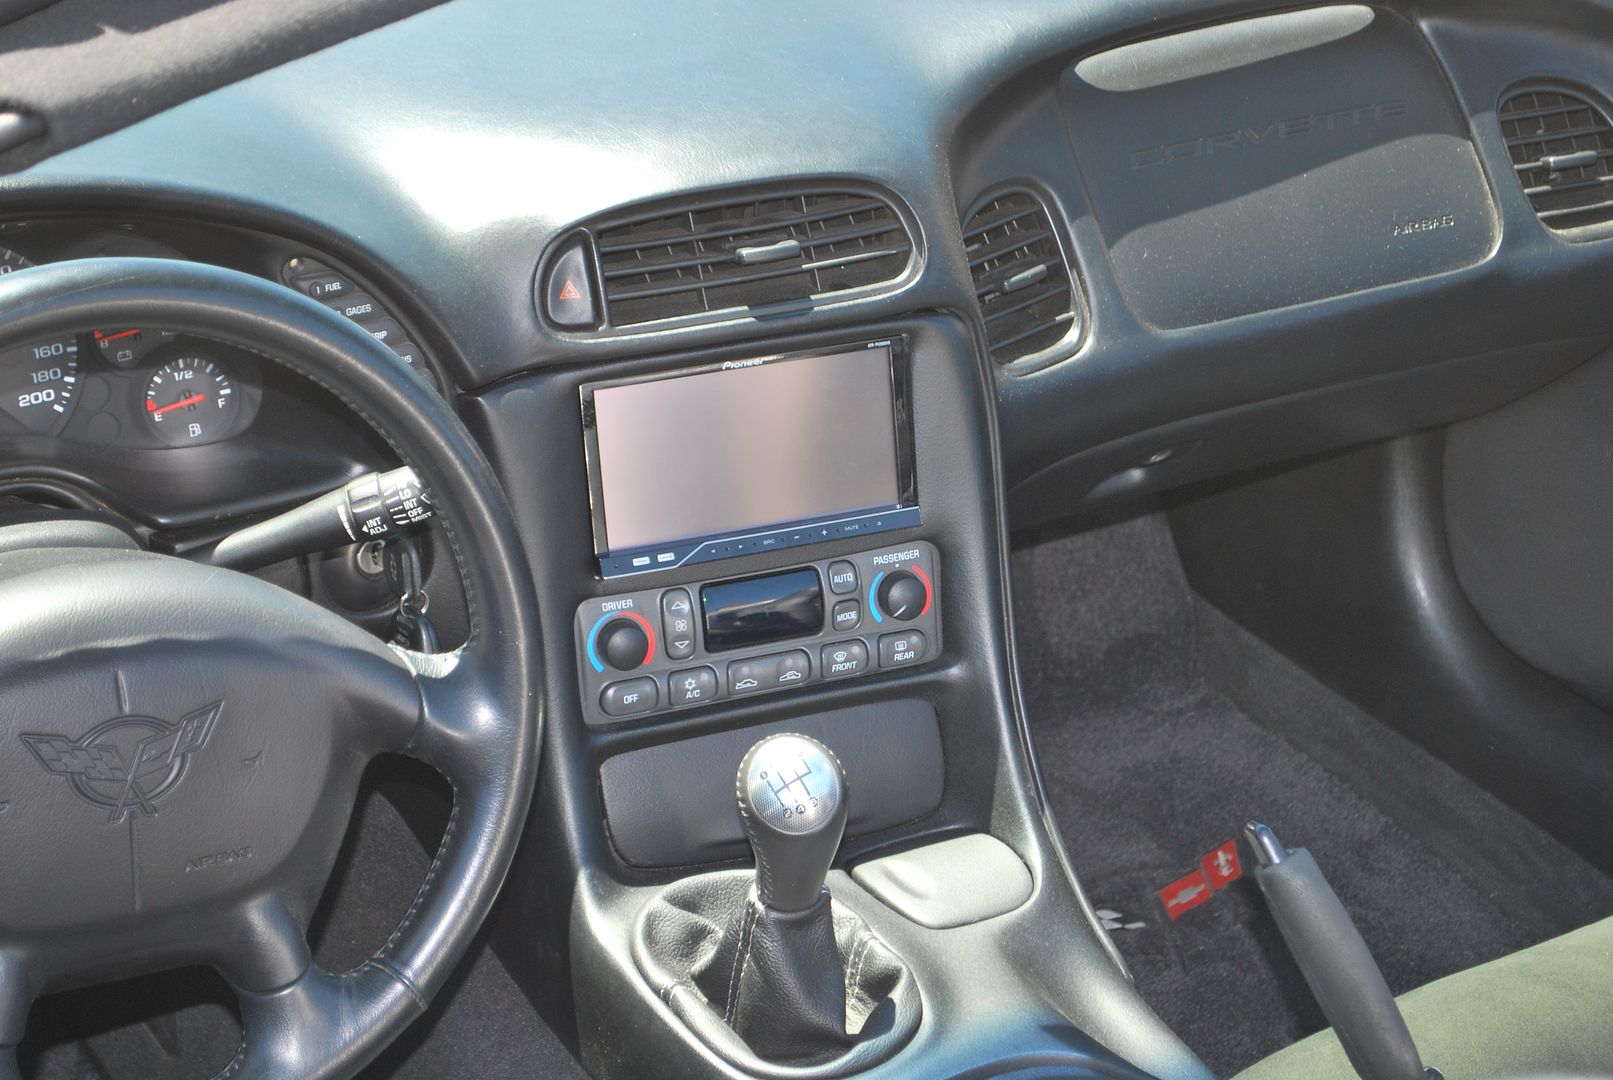 How To Install Double Din Stereo In C5 Corvette